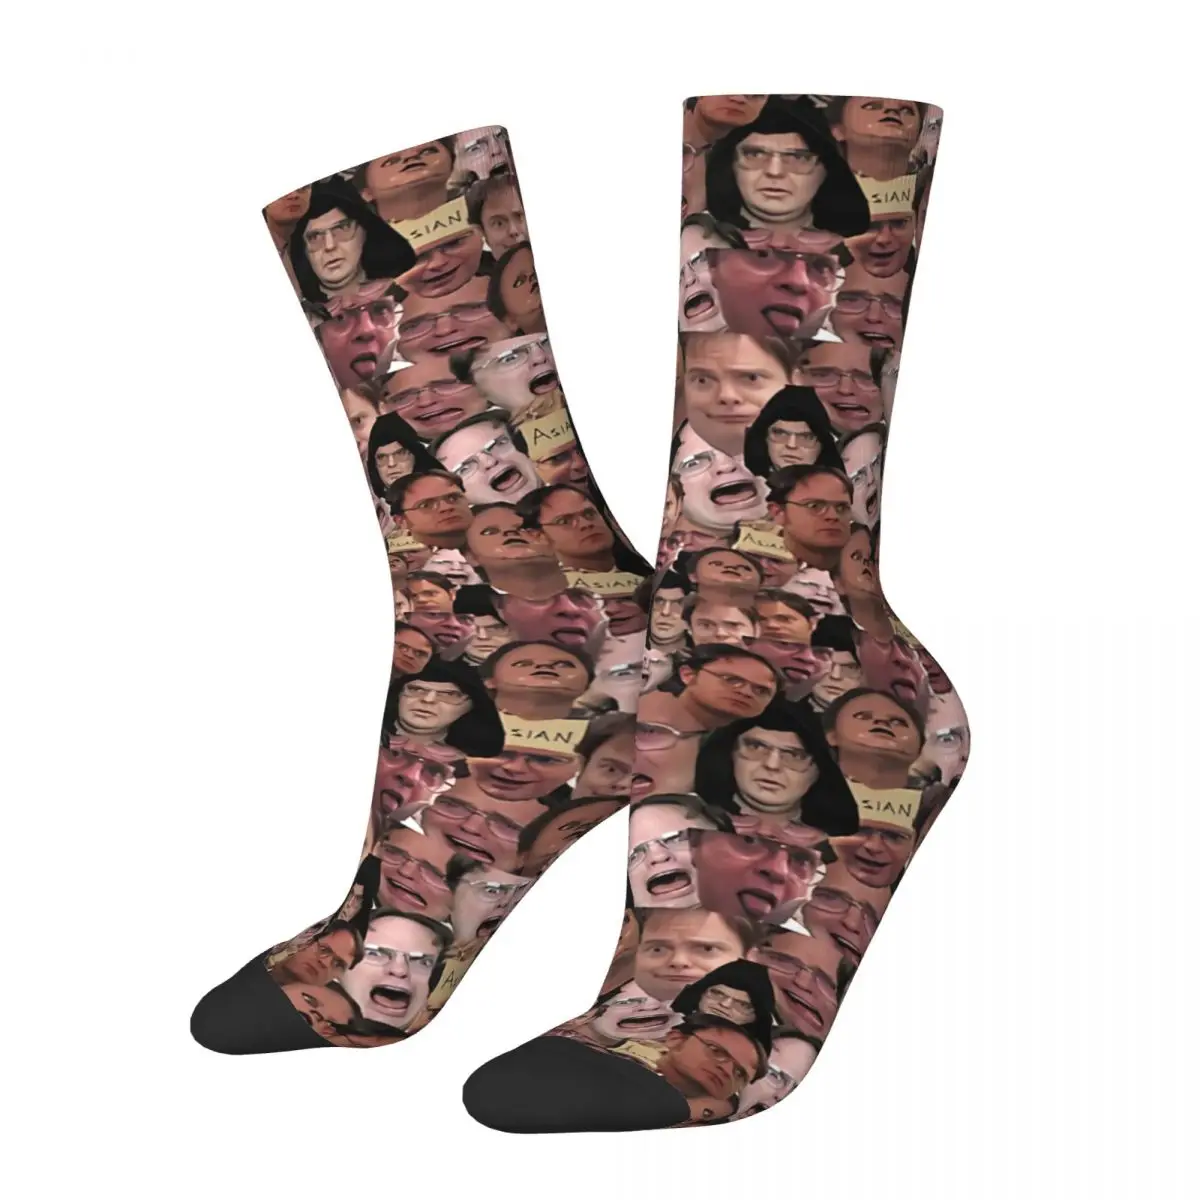 

Happy Funny Men's Socks Dwight Schrute Face Vintage Harajuku The Office TV Hip Hop Novelty Crew Crazy Sock Gift Pattern Printed